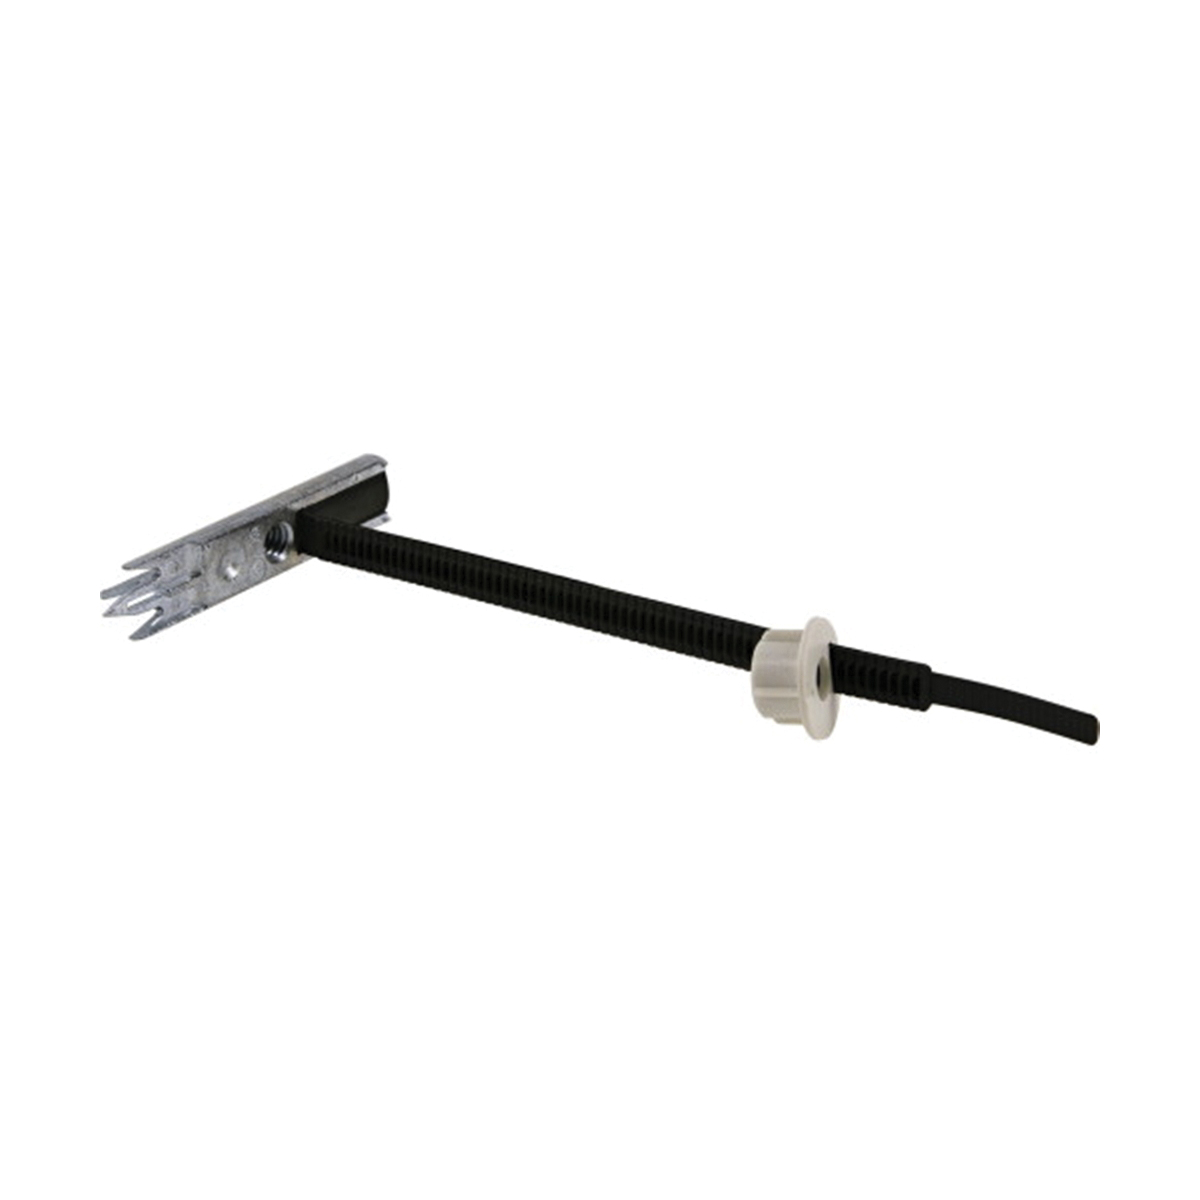 377612 Pull Toggle with Screw, Nylon/Steel